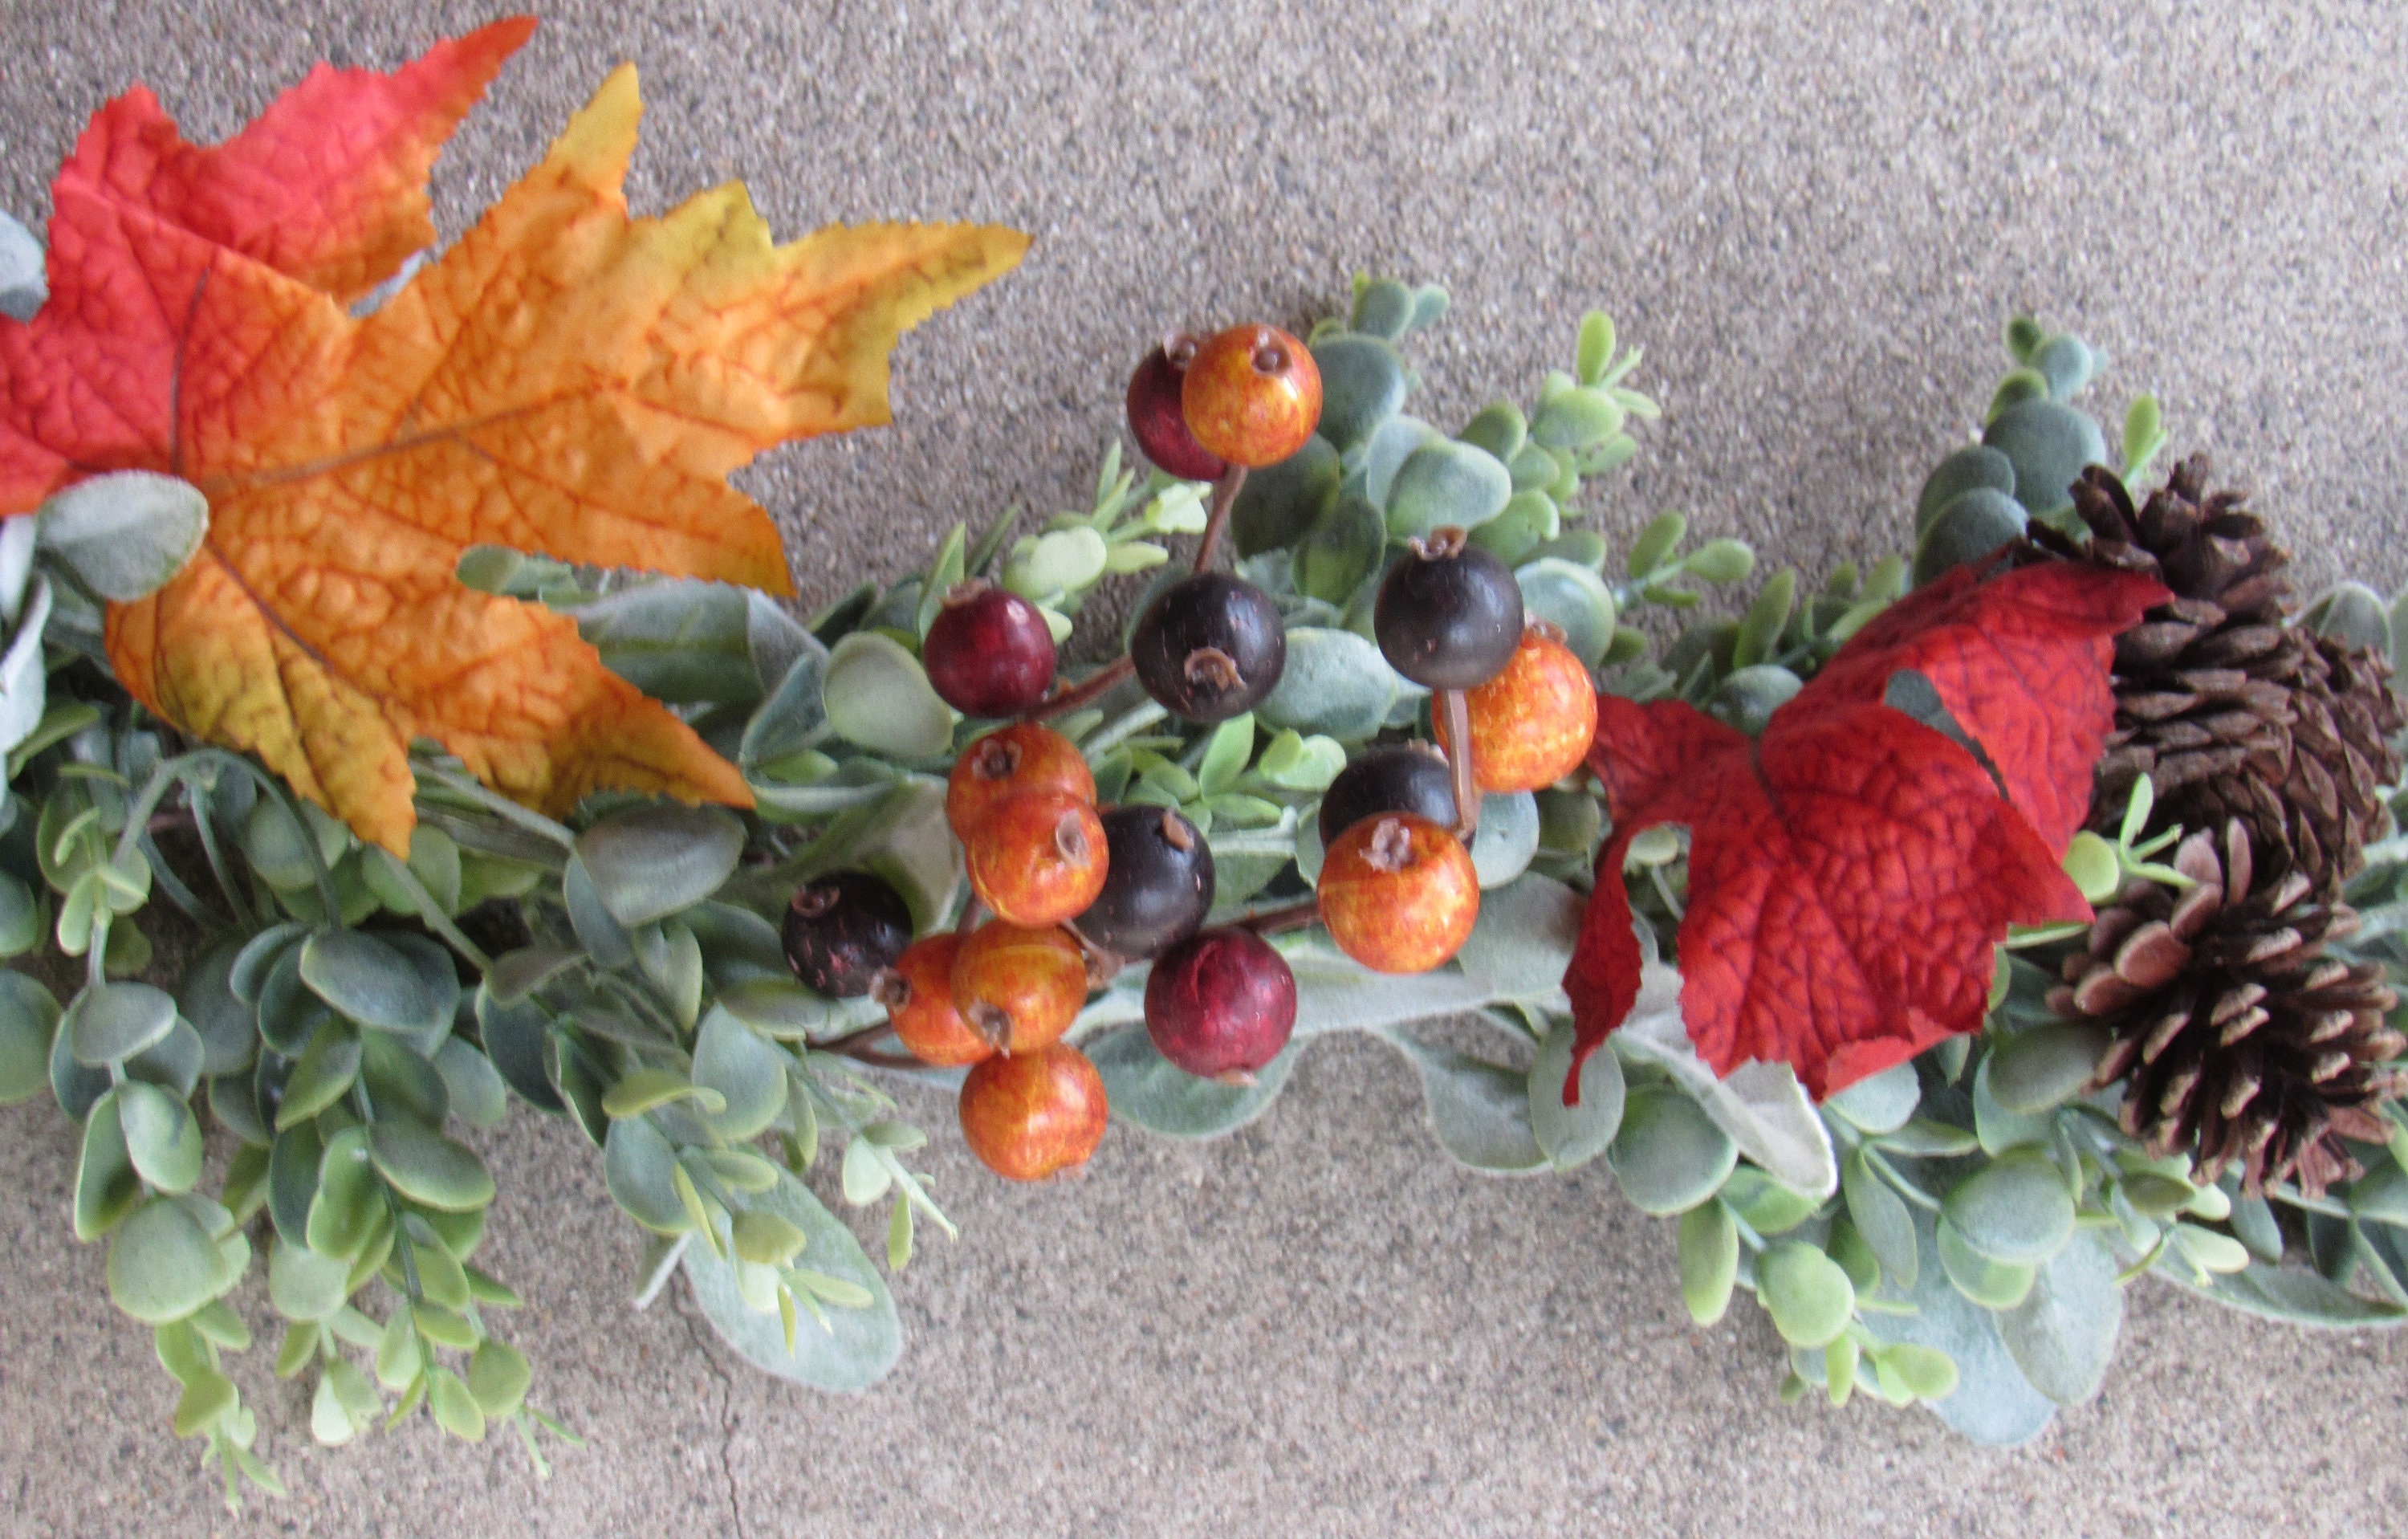 Apple Berry Garland, Fragrant Decor w/ Red Bow by Creekside Farms